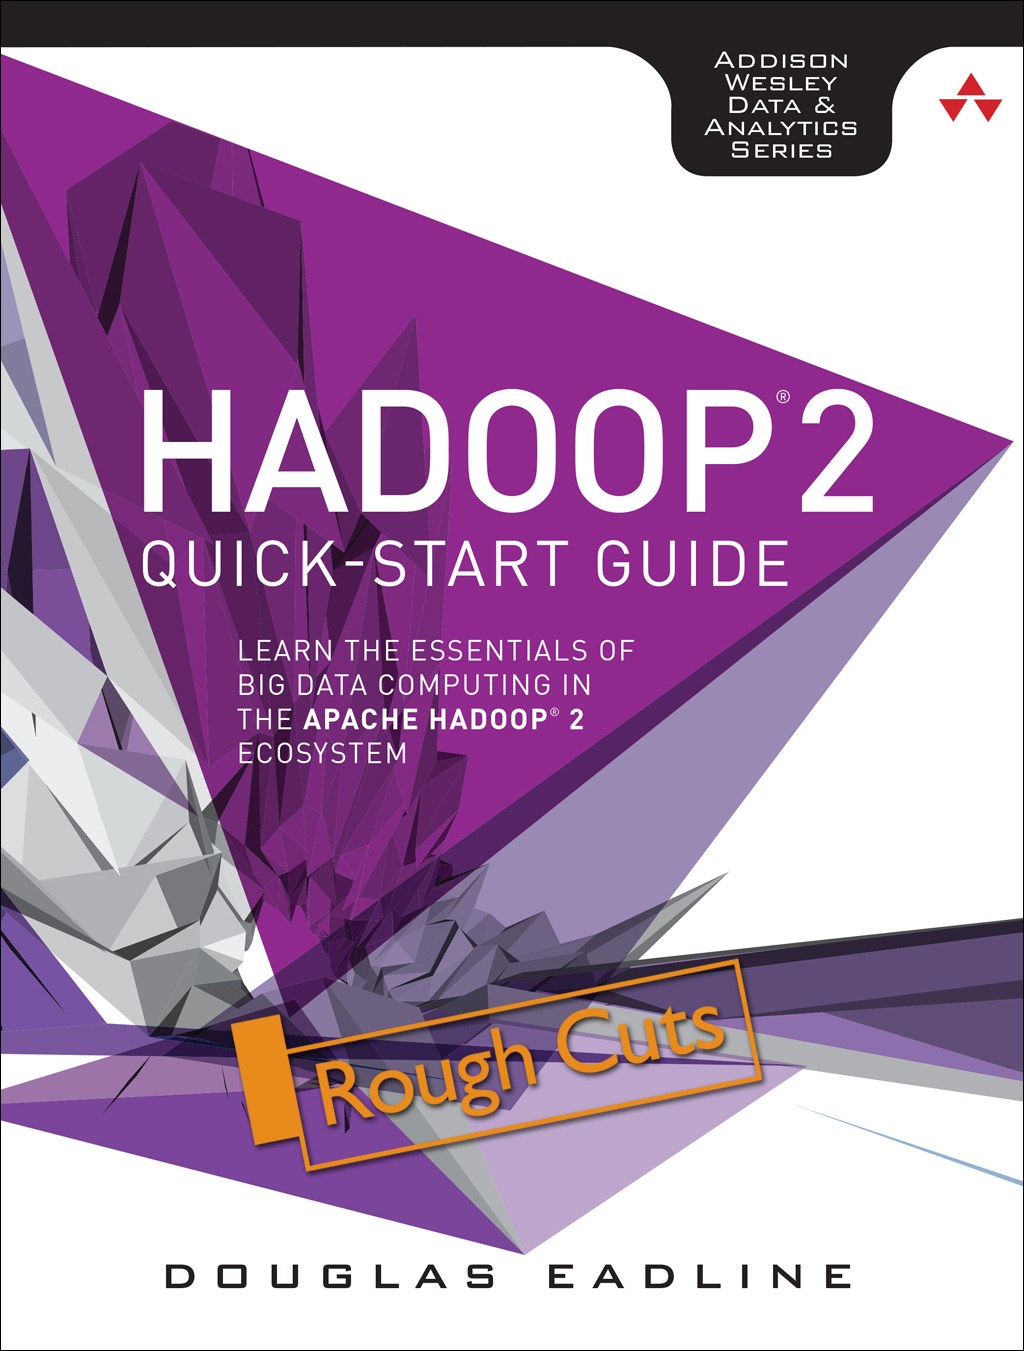 Hadoop 2 Quick-Start Guide: Learn the Essentials of Big Data Computing in the Apache Hadoop 2 Ecosystem, Rough Cuts